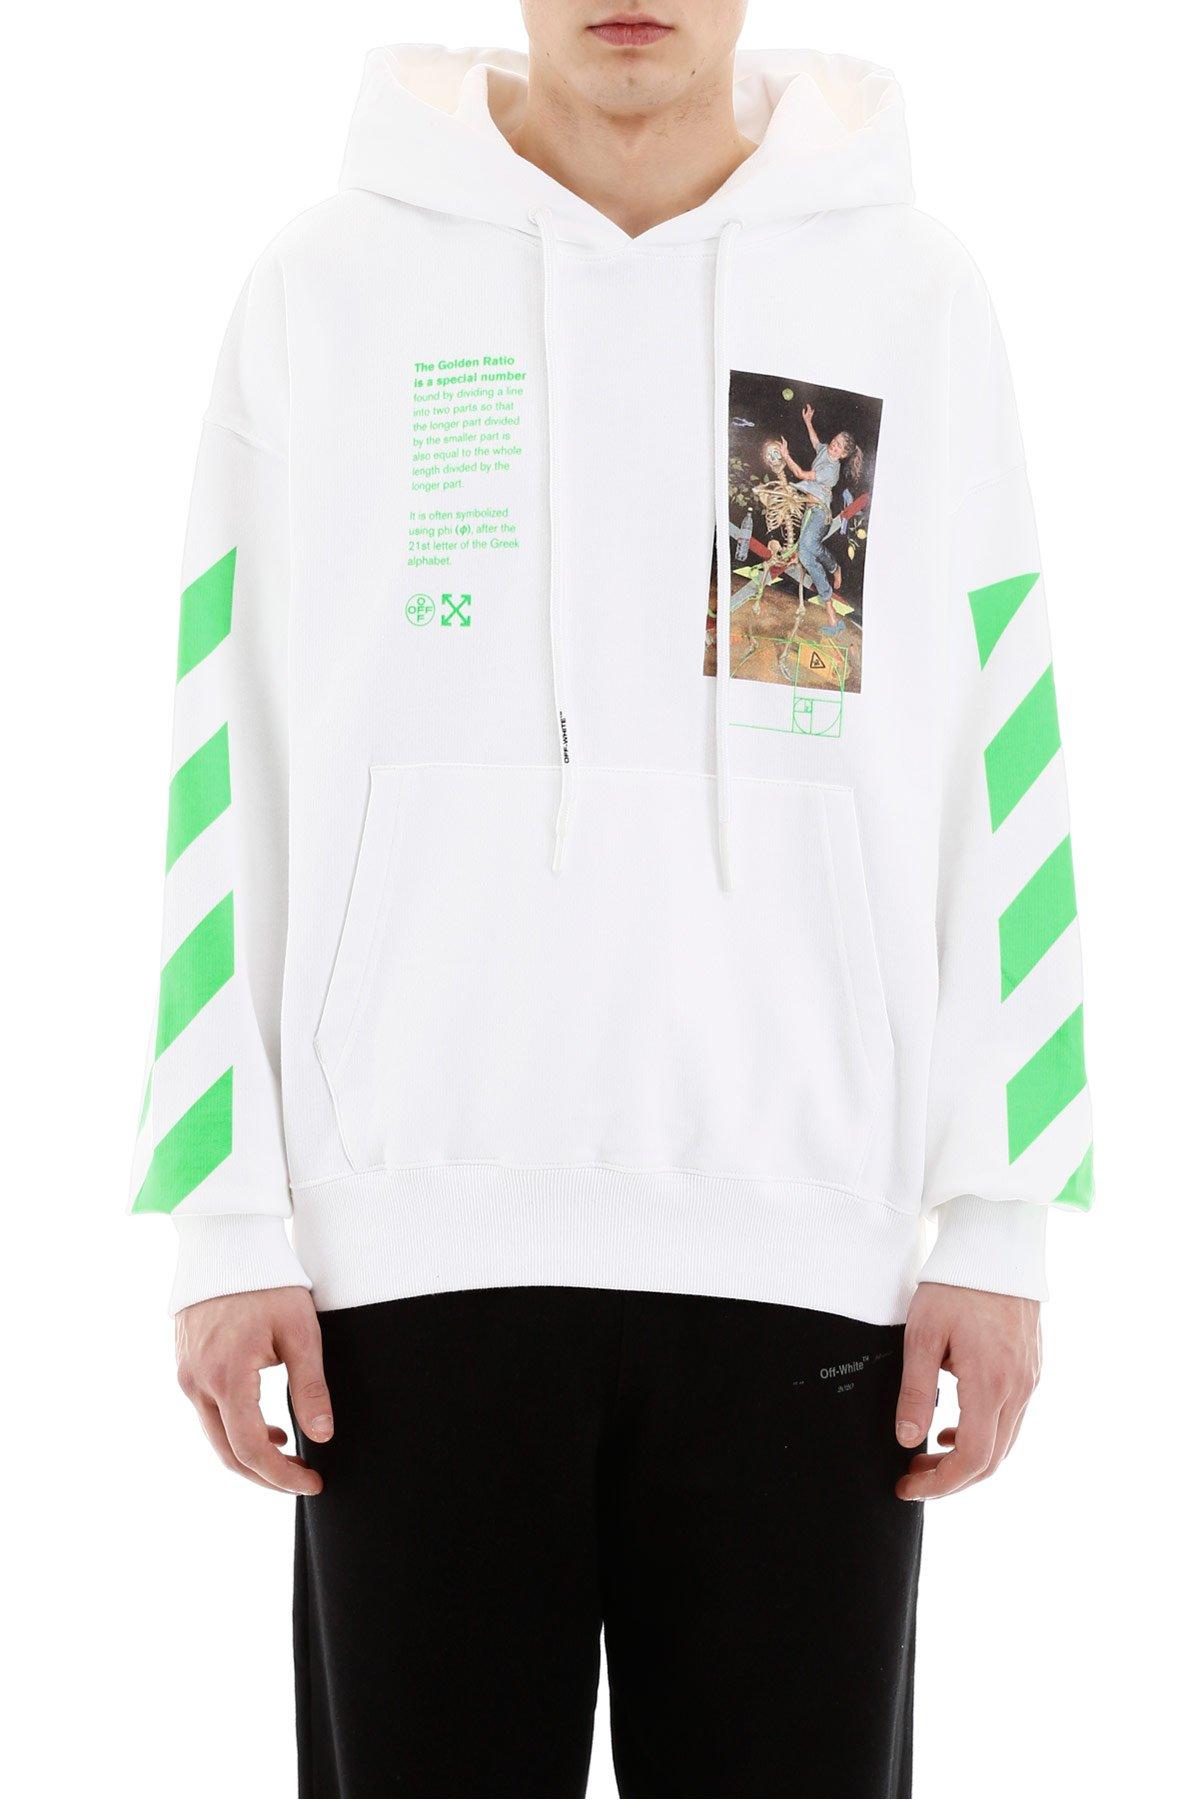 Off-White c/o Virgil Abloh Pascal Painting Print Sweatshirt in White 